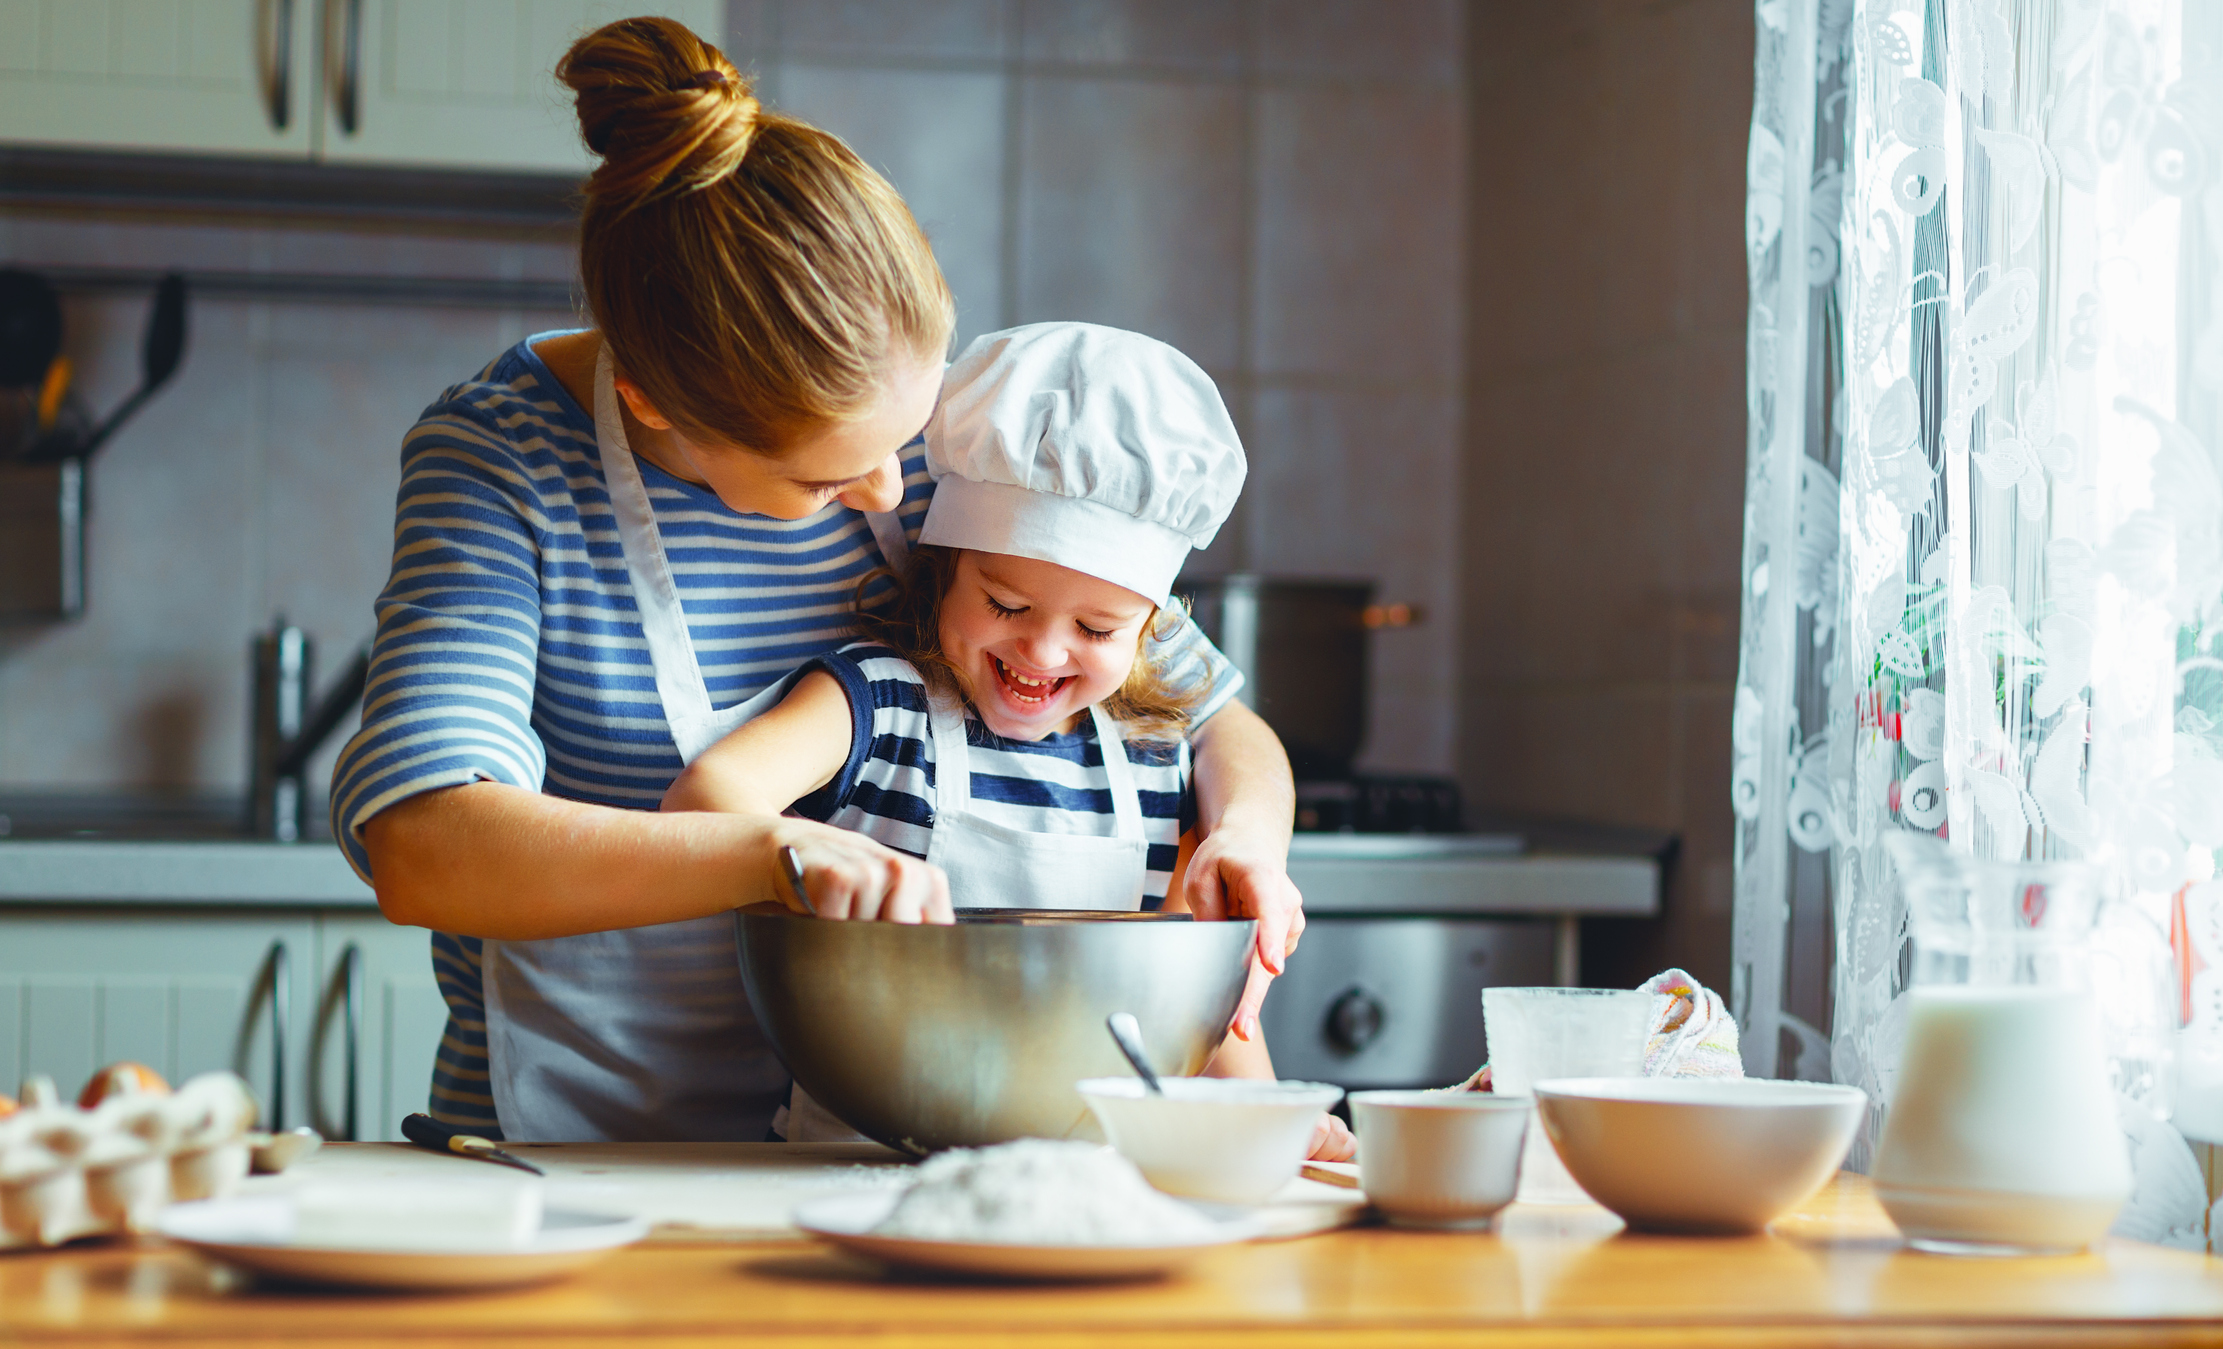 Getty Images - Baking Kids 2